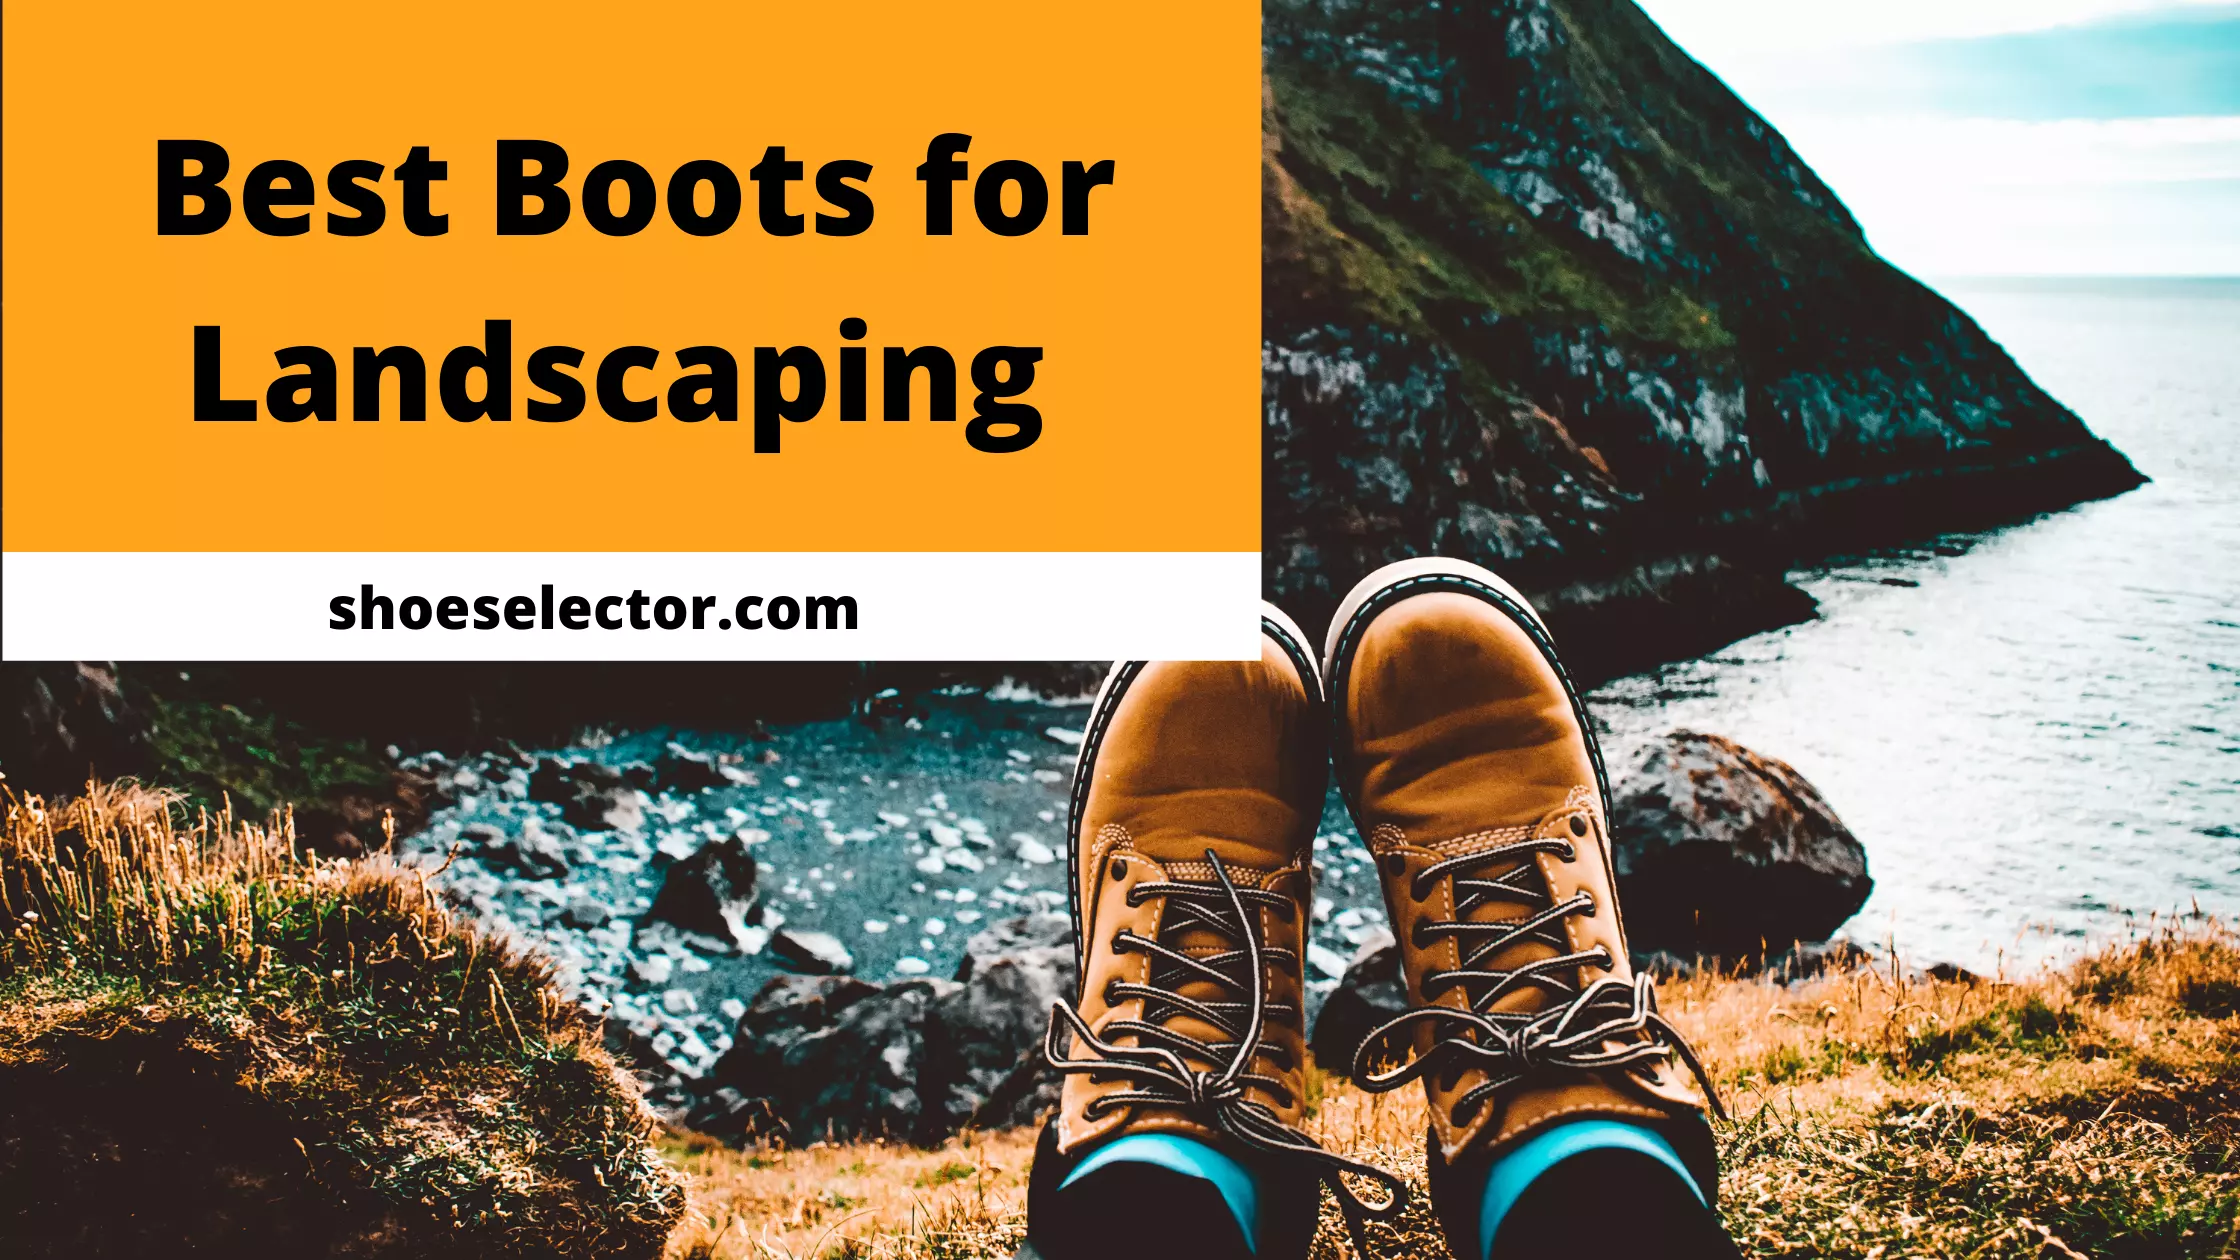 Best Boots for Landscaping - Complete Buying Guides